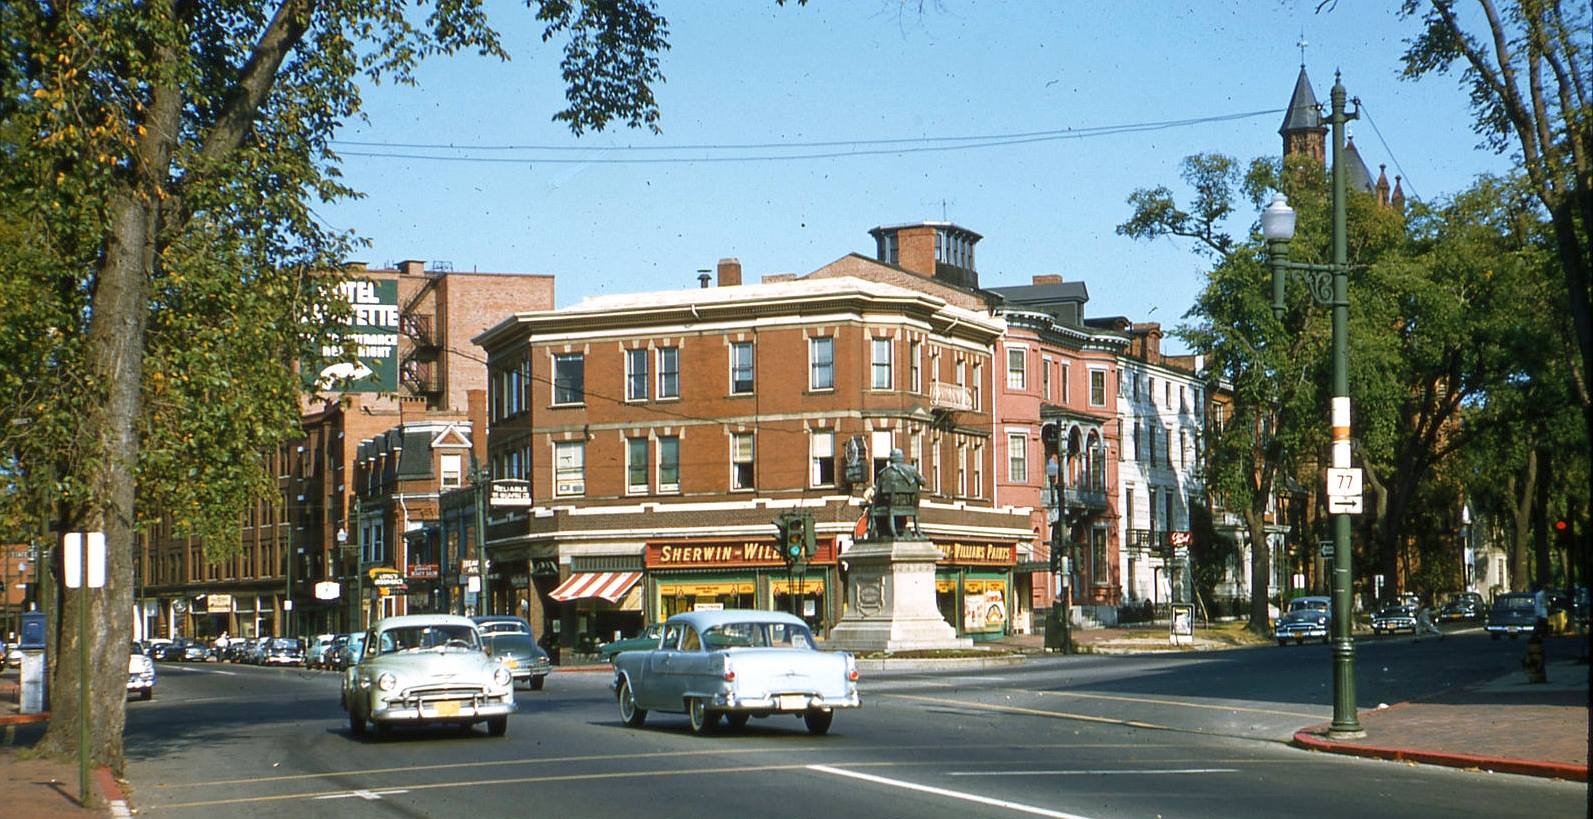 Longfellow Square in the 1950s